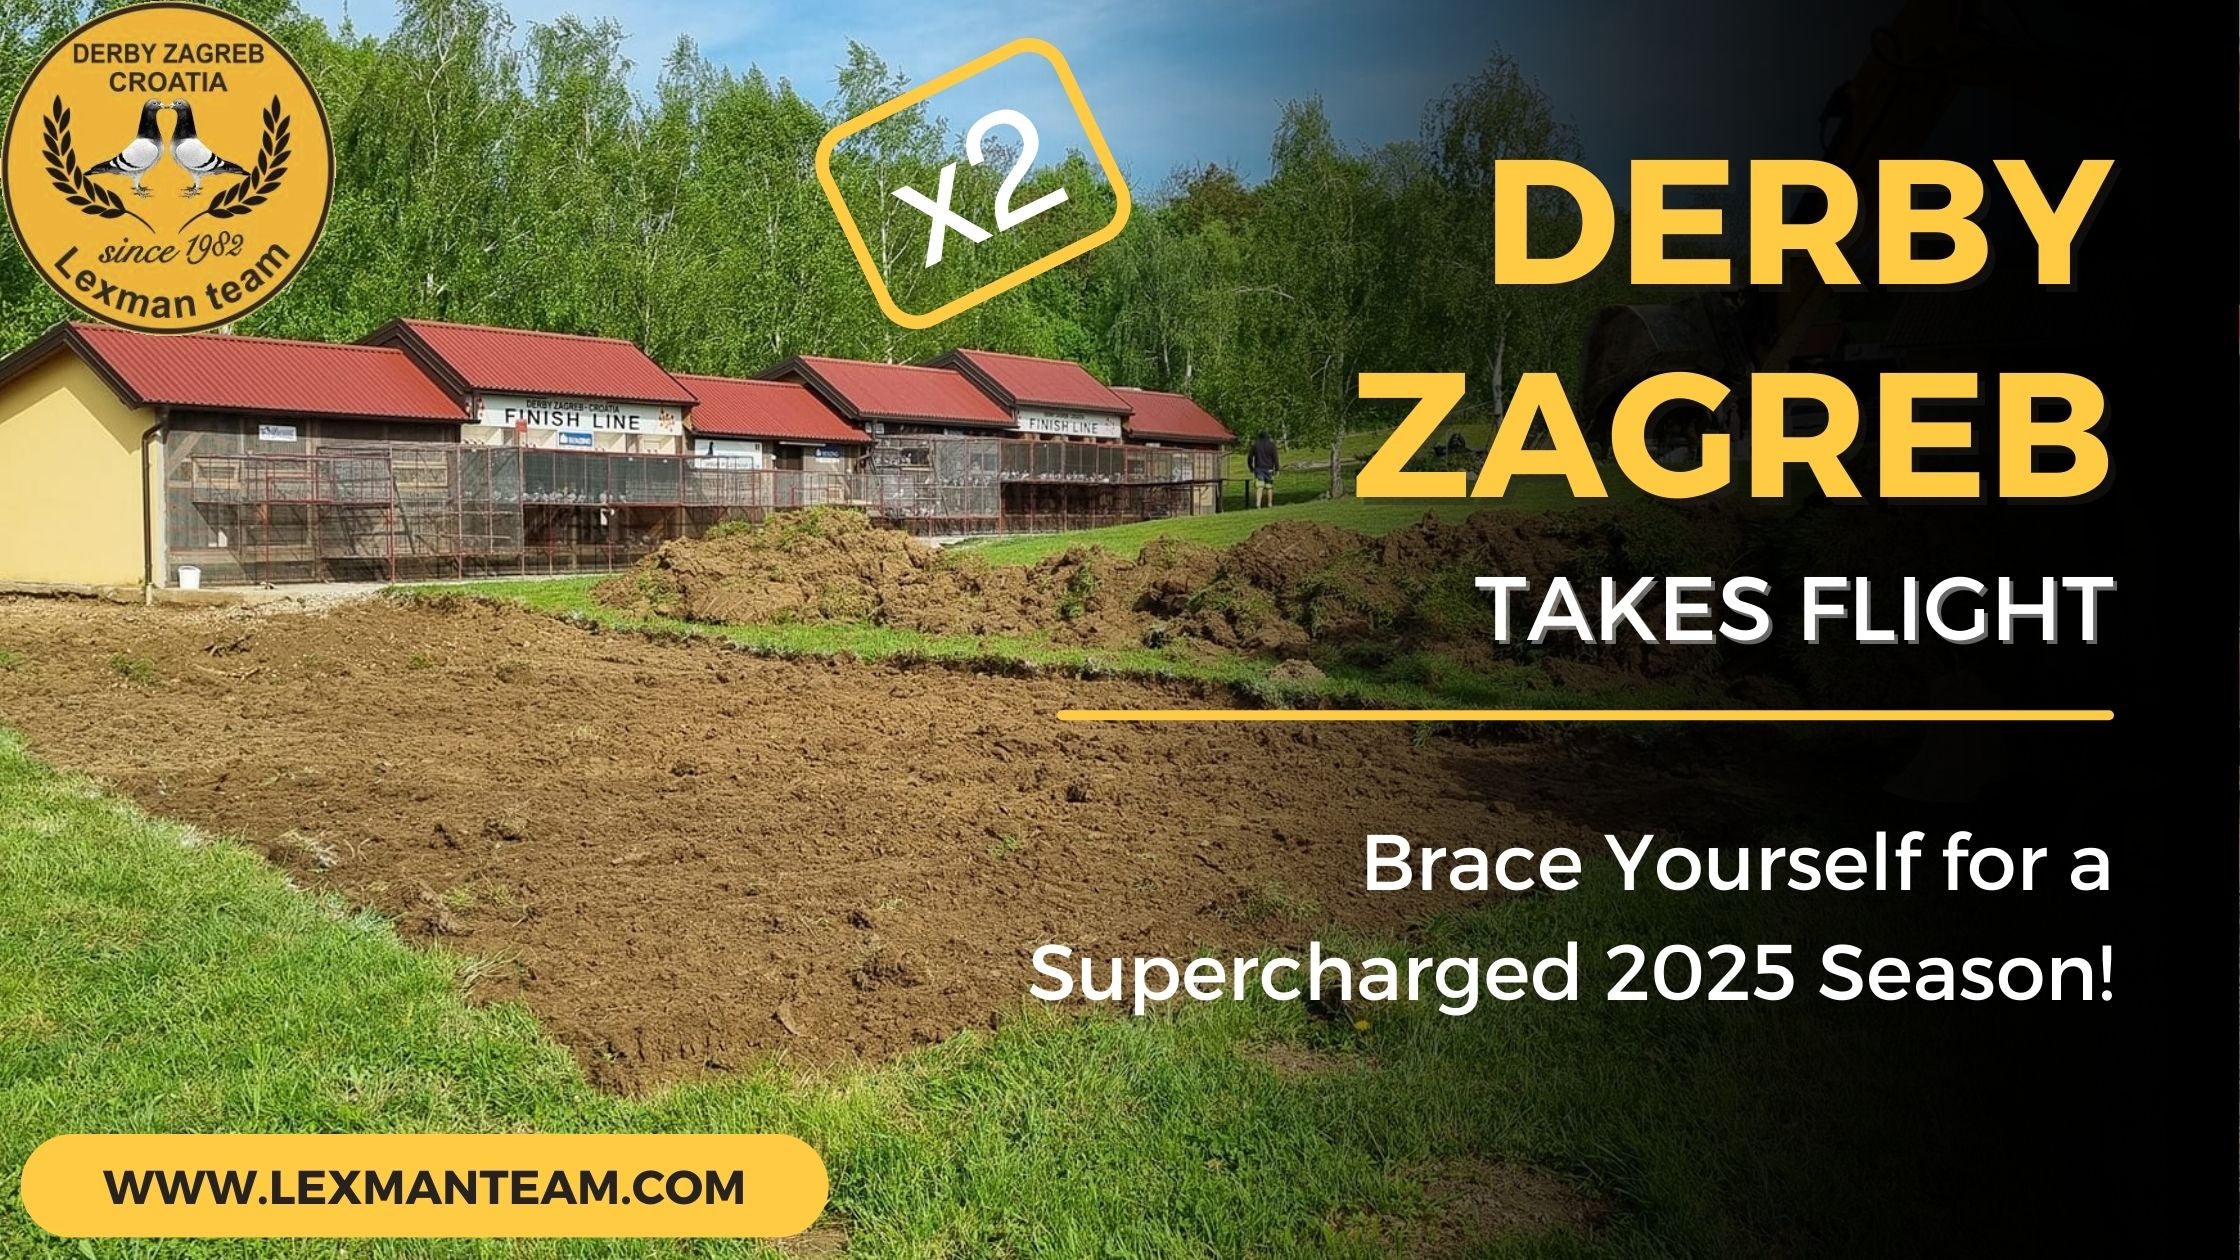 Derby Zagreb Takes Flight: Brace Yourself for a Supercharged 2025 Season!